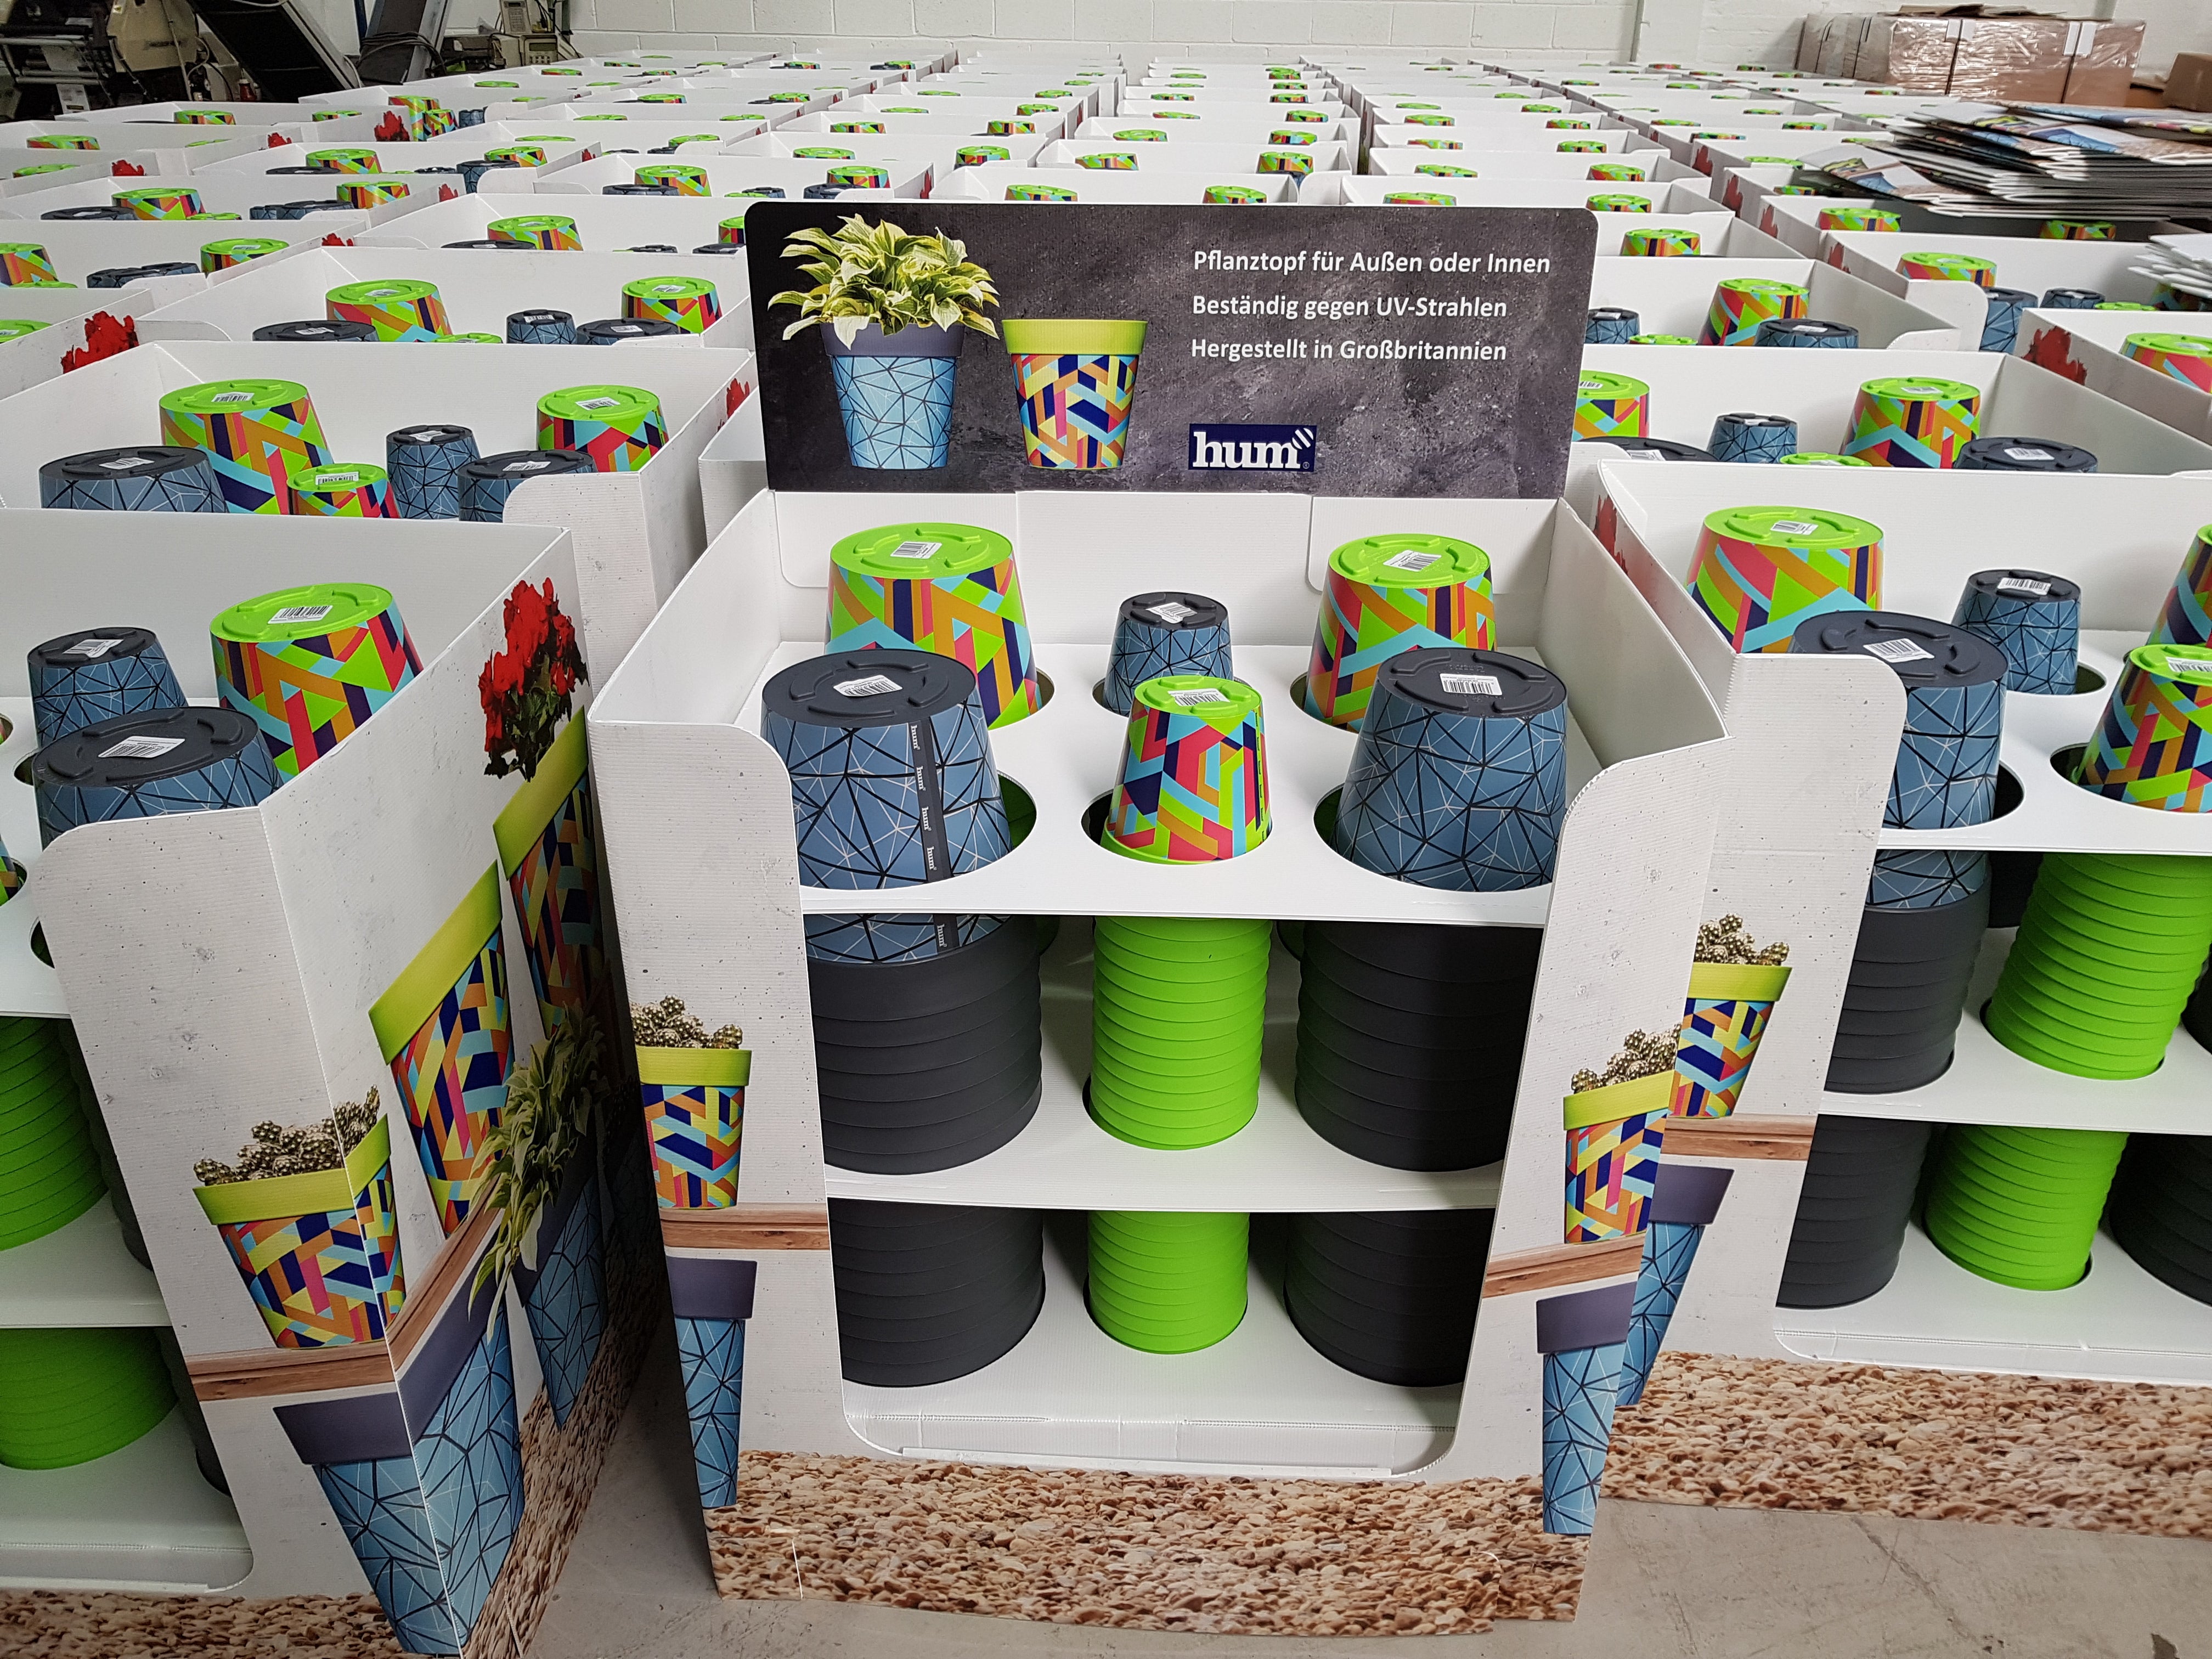 A warehouse packed with display stands full of Hum Flowerpots for retail customers